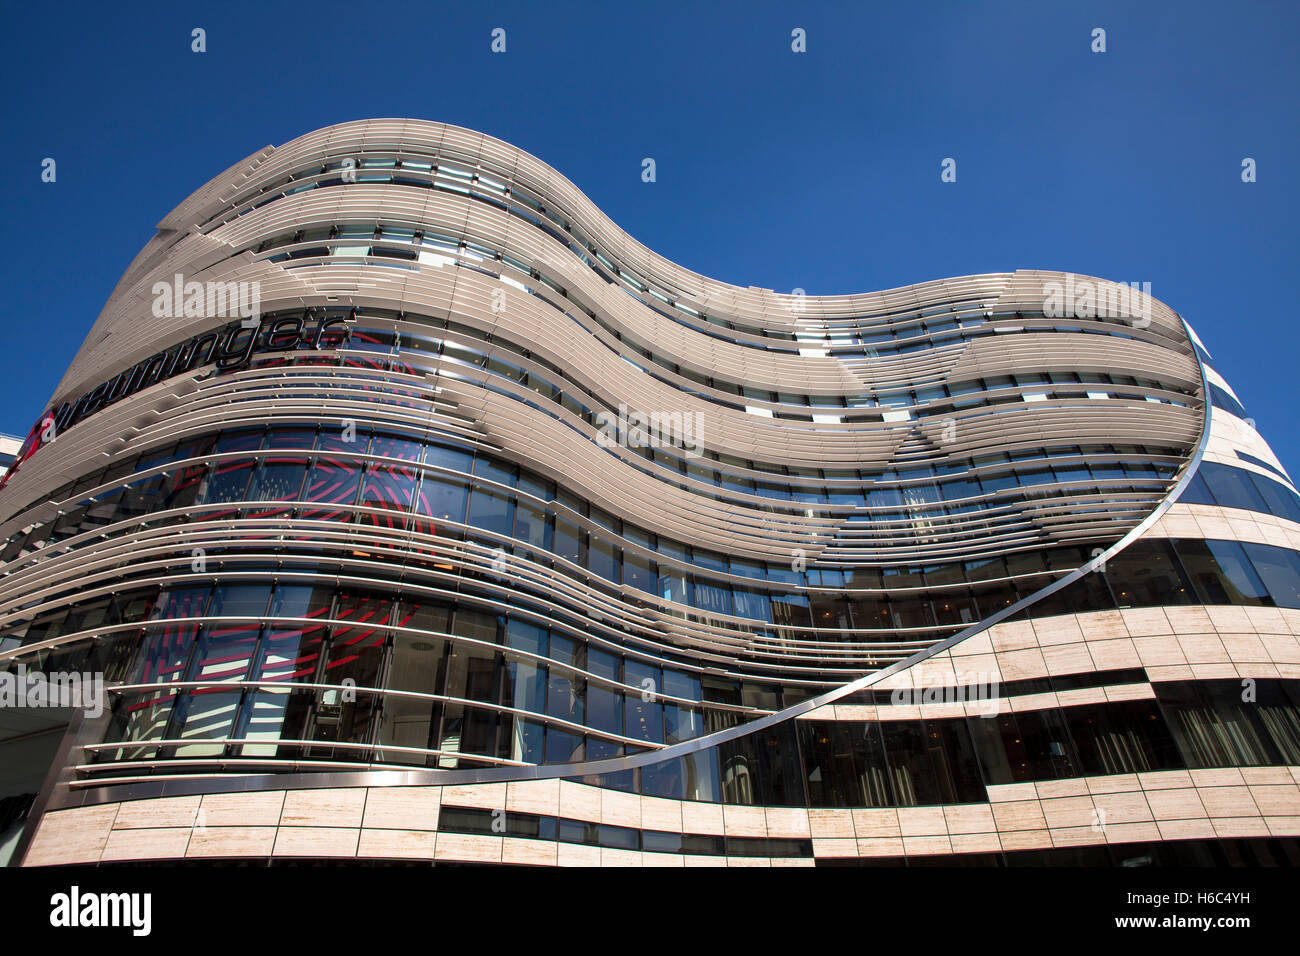 Europe, Germany, Duesseldorf, the building Koe-Bogen by architect Daniel Libeskind. Stock Photo